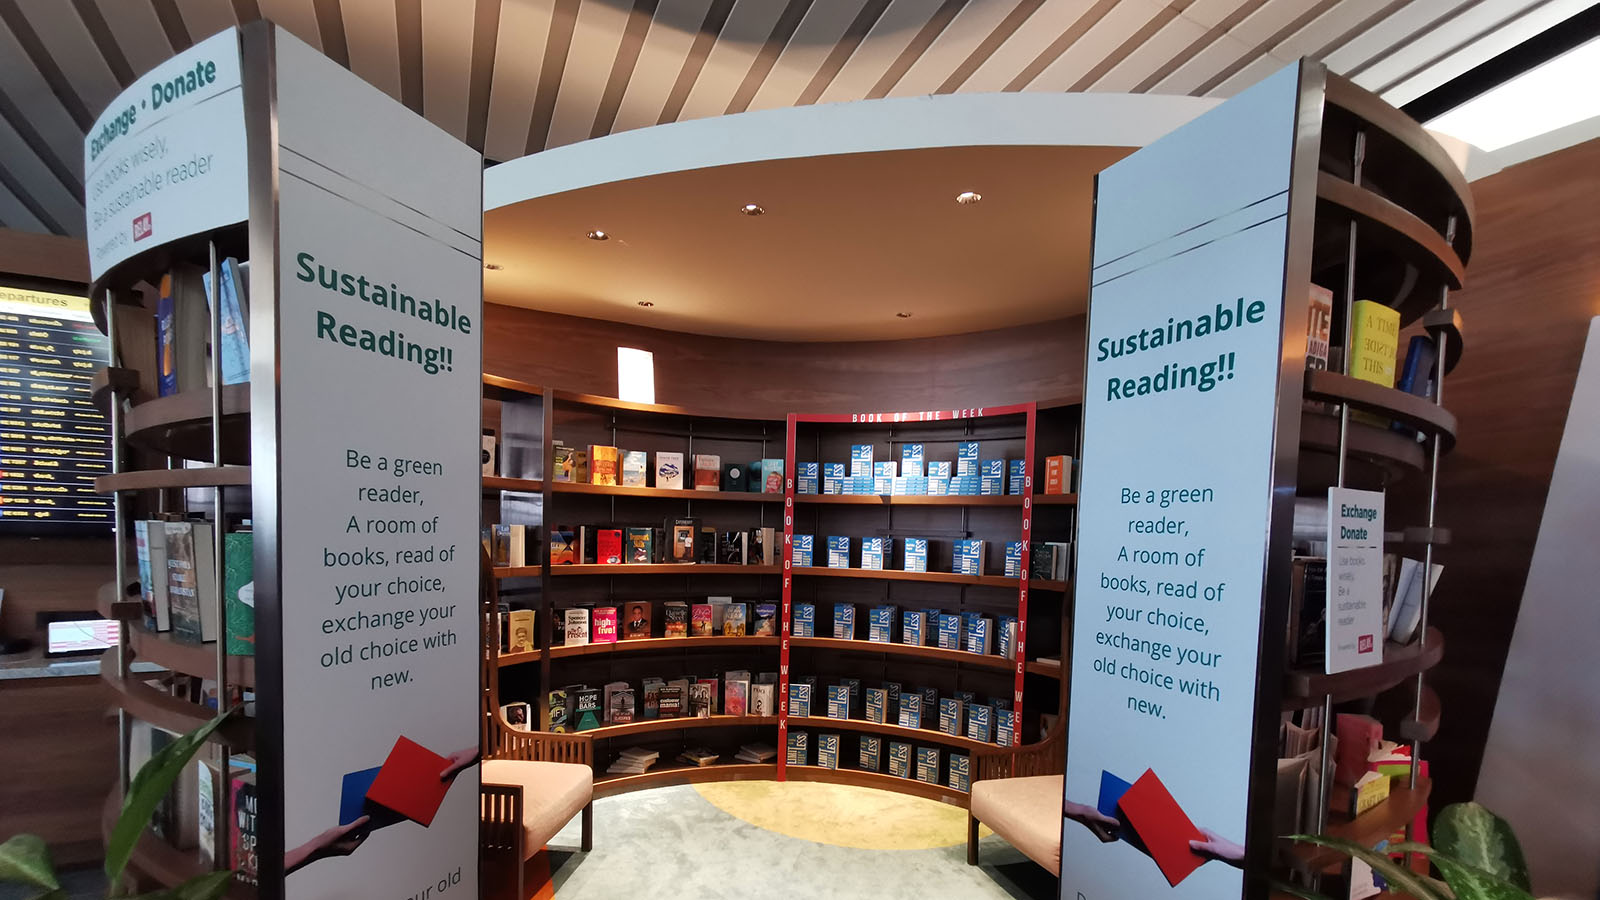 The lounge used by Air India A320neo Business Class passengers in Bengaluru has a library